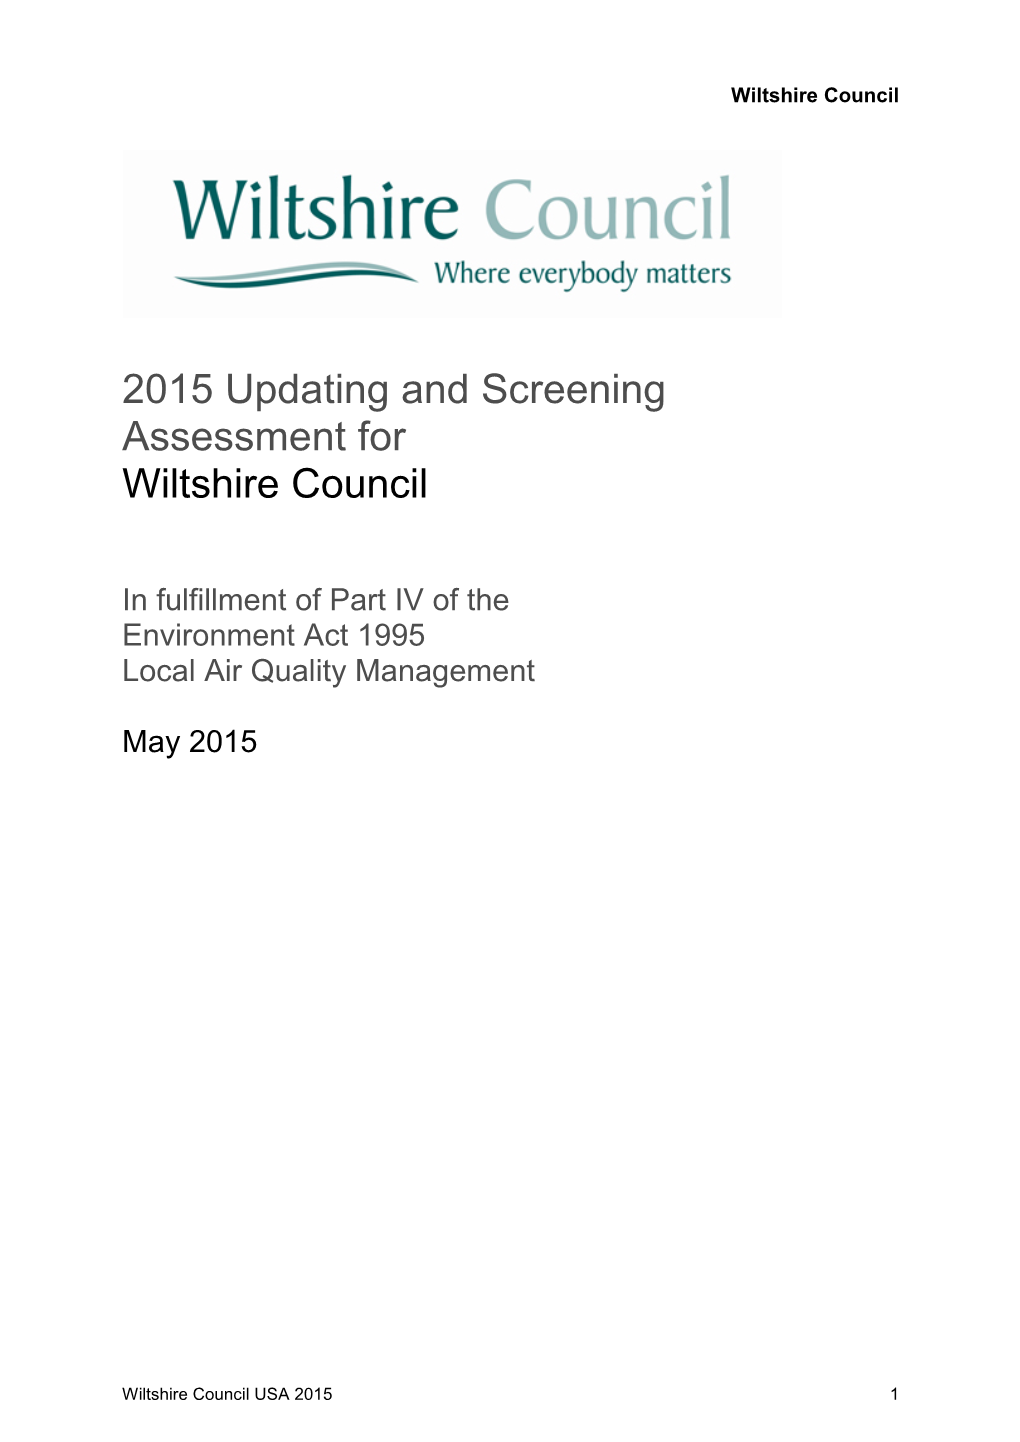 2015 Updating and Screening Assessment for Wiltshire Council